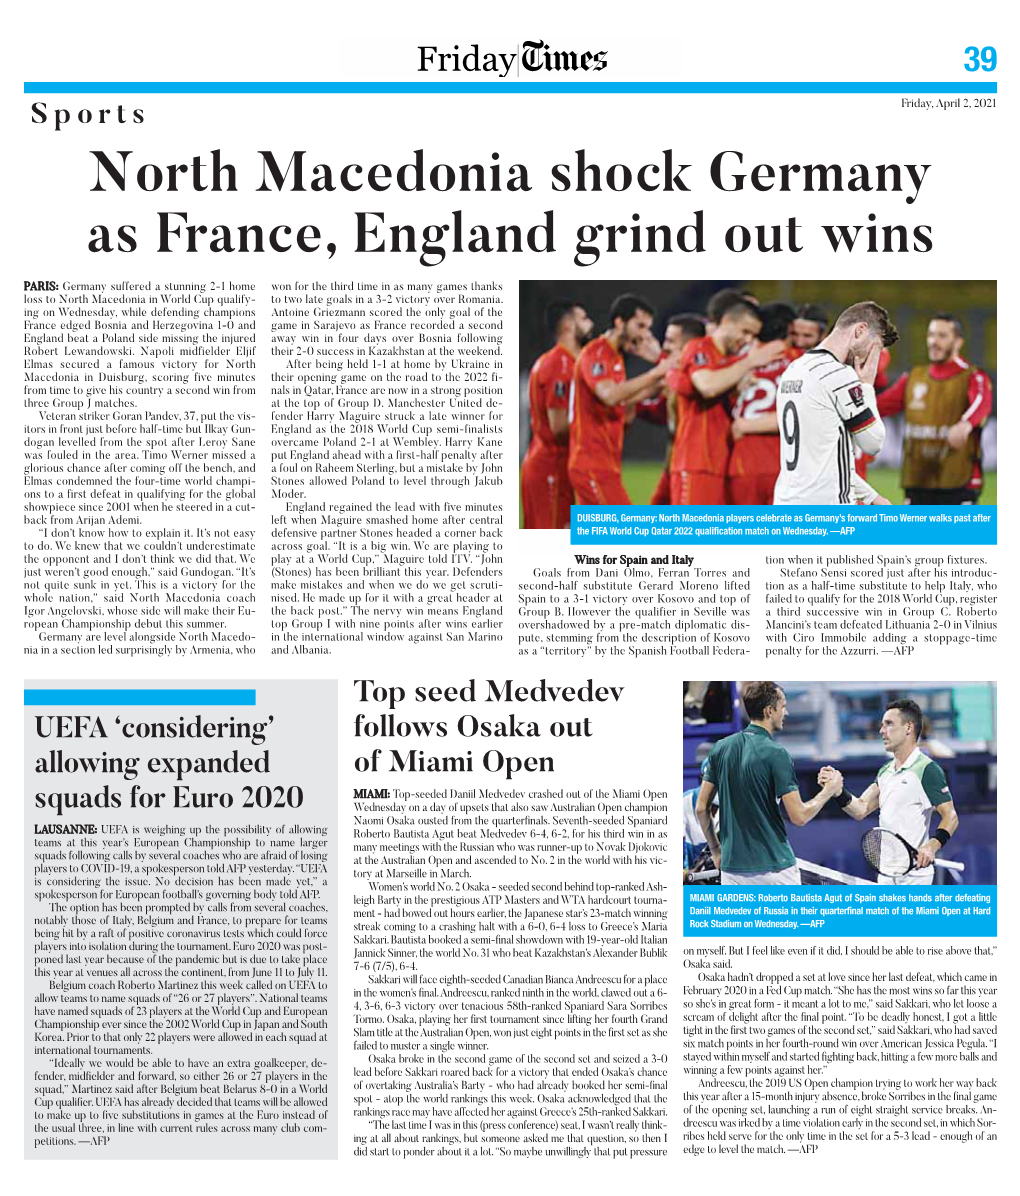 North Macedonia Shock Germany As France, England Grind out Wins